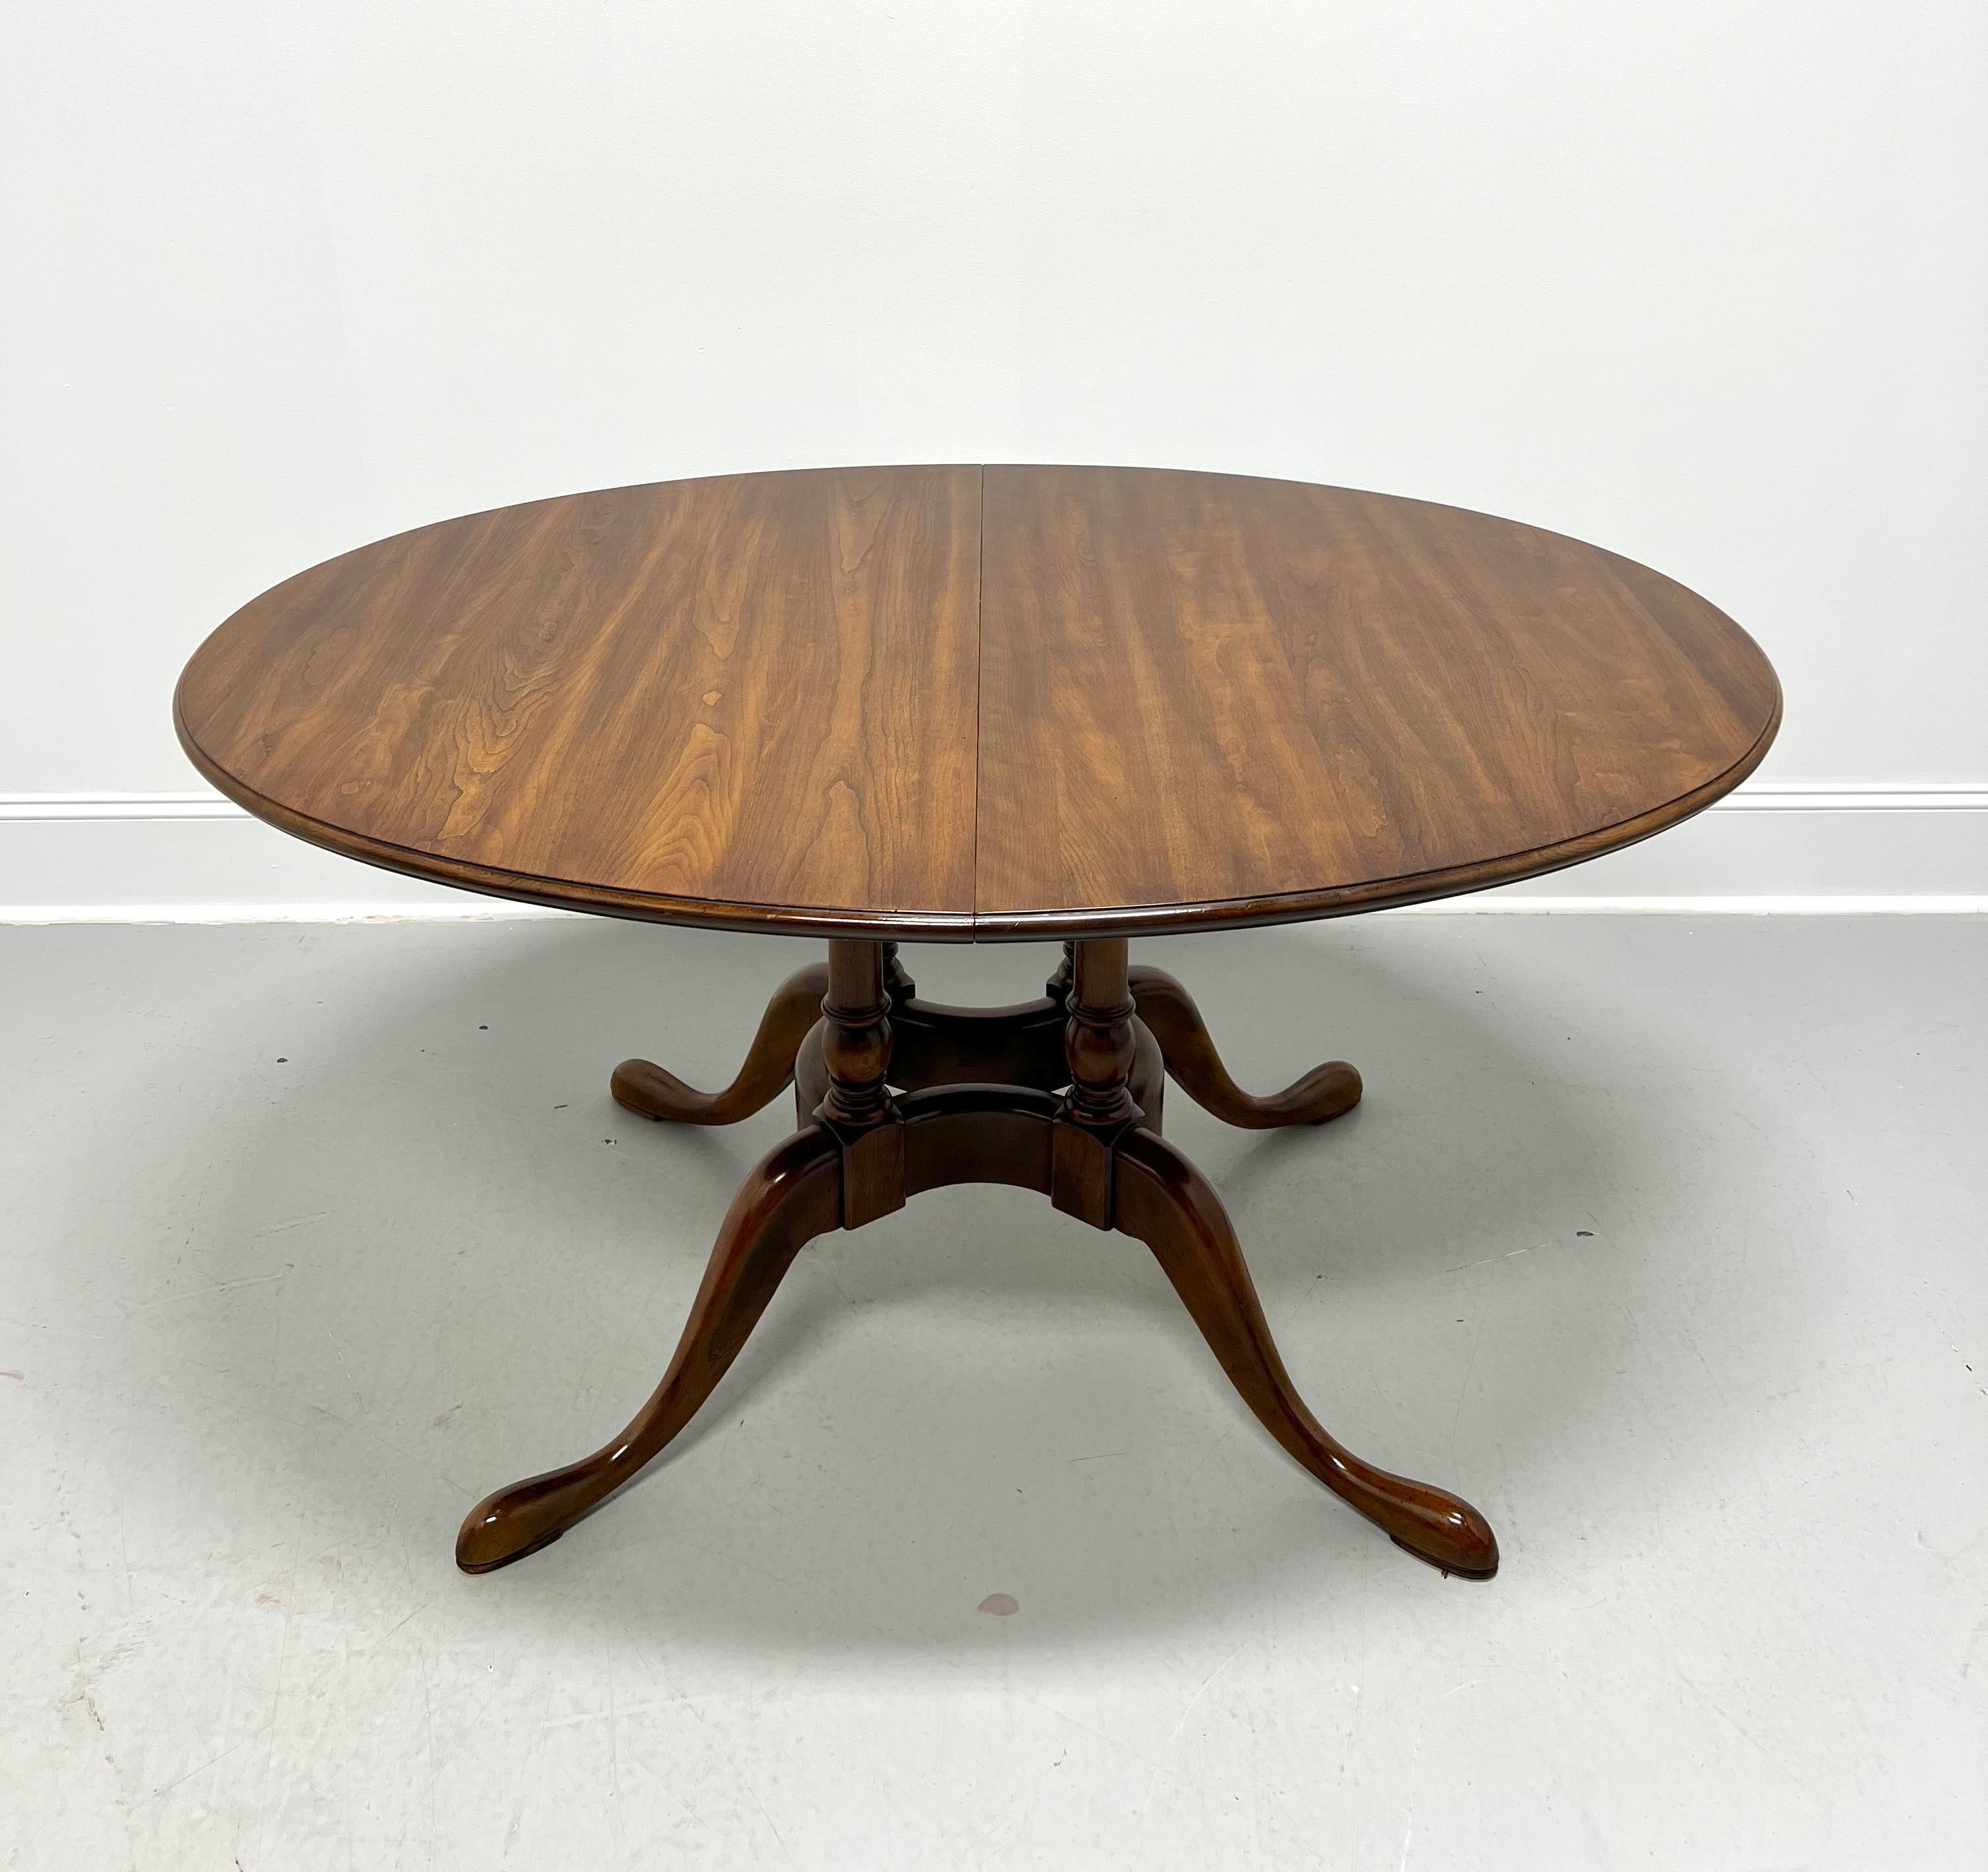 A Queen Anne style oval dining table by Statton Furniture. Solid cherry wood with their Oxford finish, bevel edge to the top, recessed apron, single birdcage pedestal, curved legs, and pad feet. Includes two 18 inch extension leaves for placement on